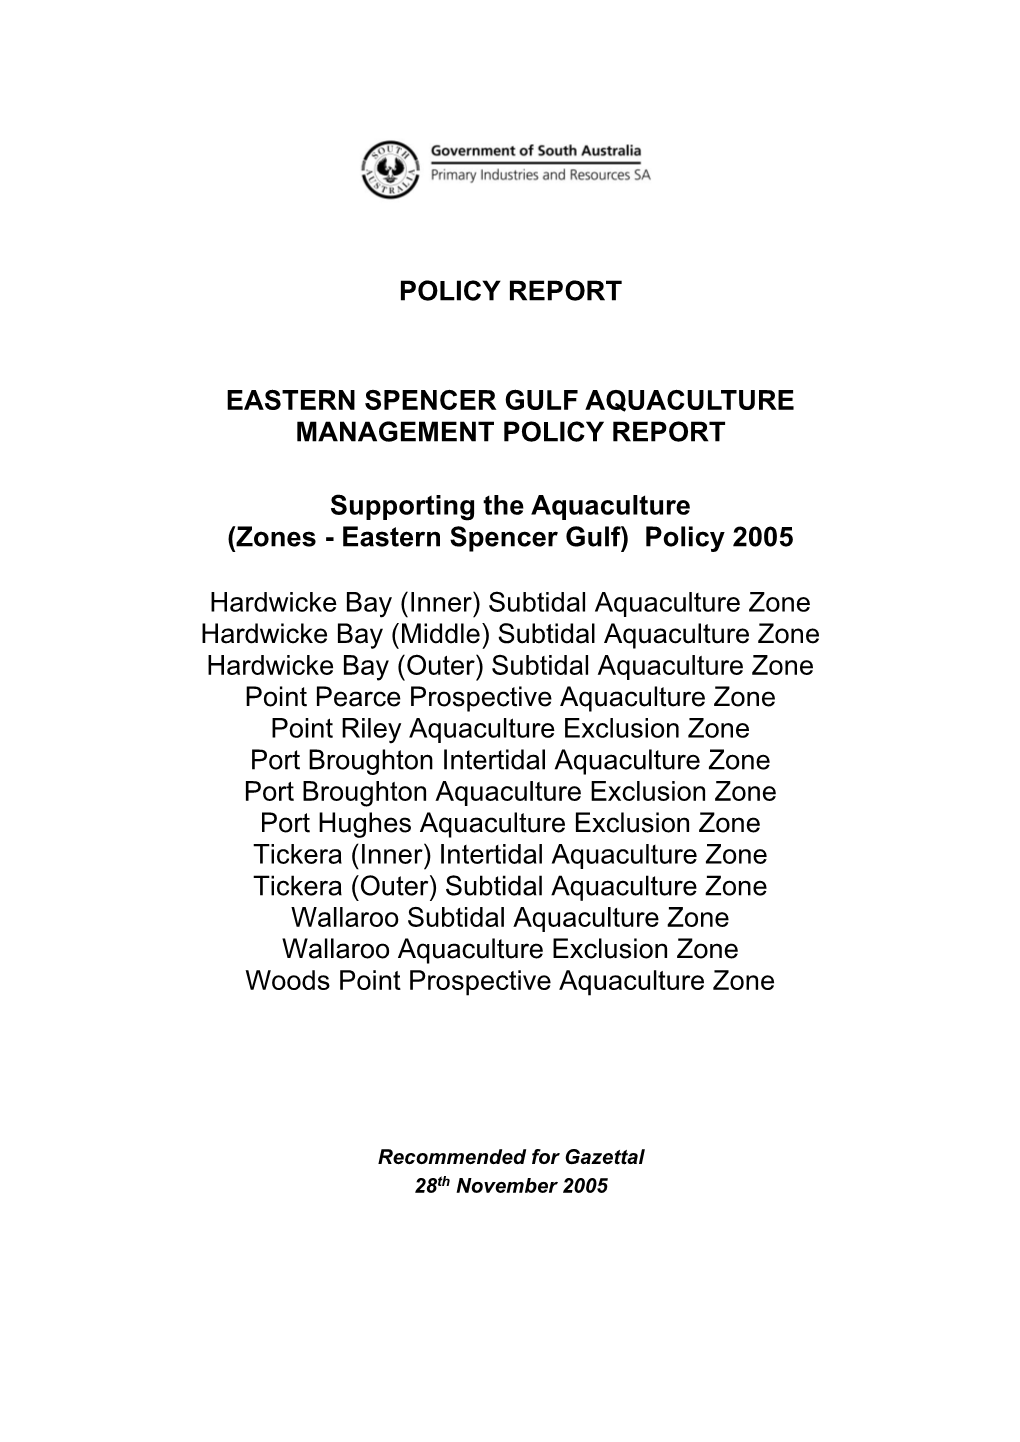 Policy Report Supporting ESG Zone Policy